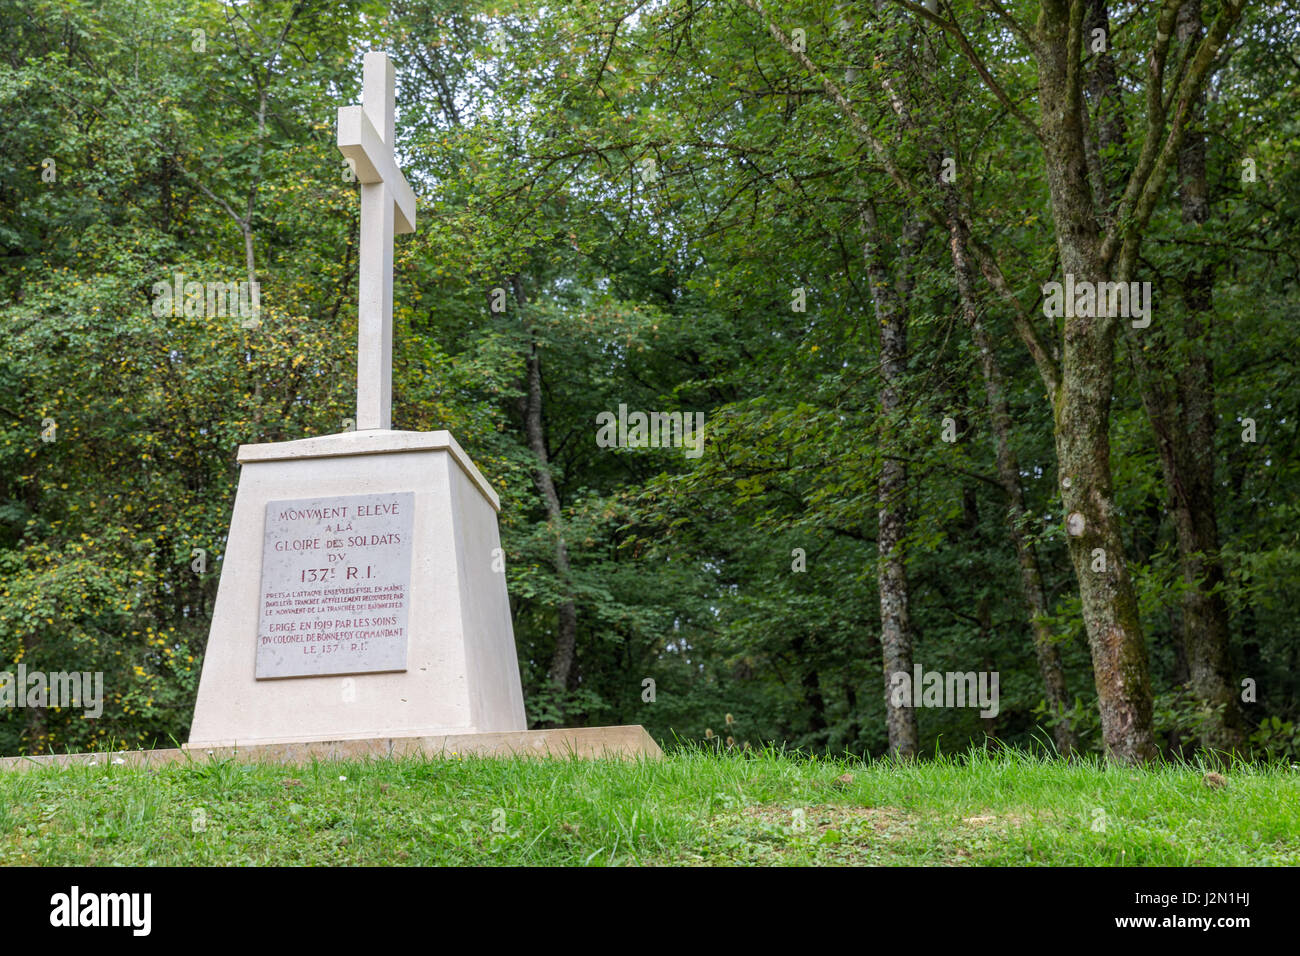 VERDUN, FRANCE - AUGUST 19, 2016: First World War One memorial near Trench of Bayonets at Douaumont, France Stock Photo